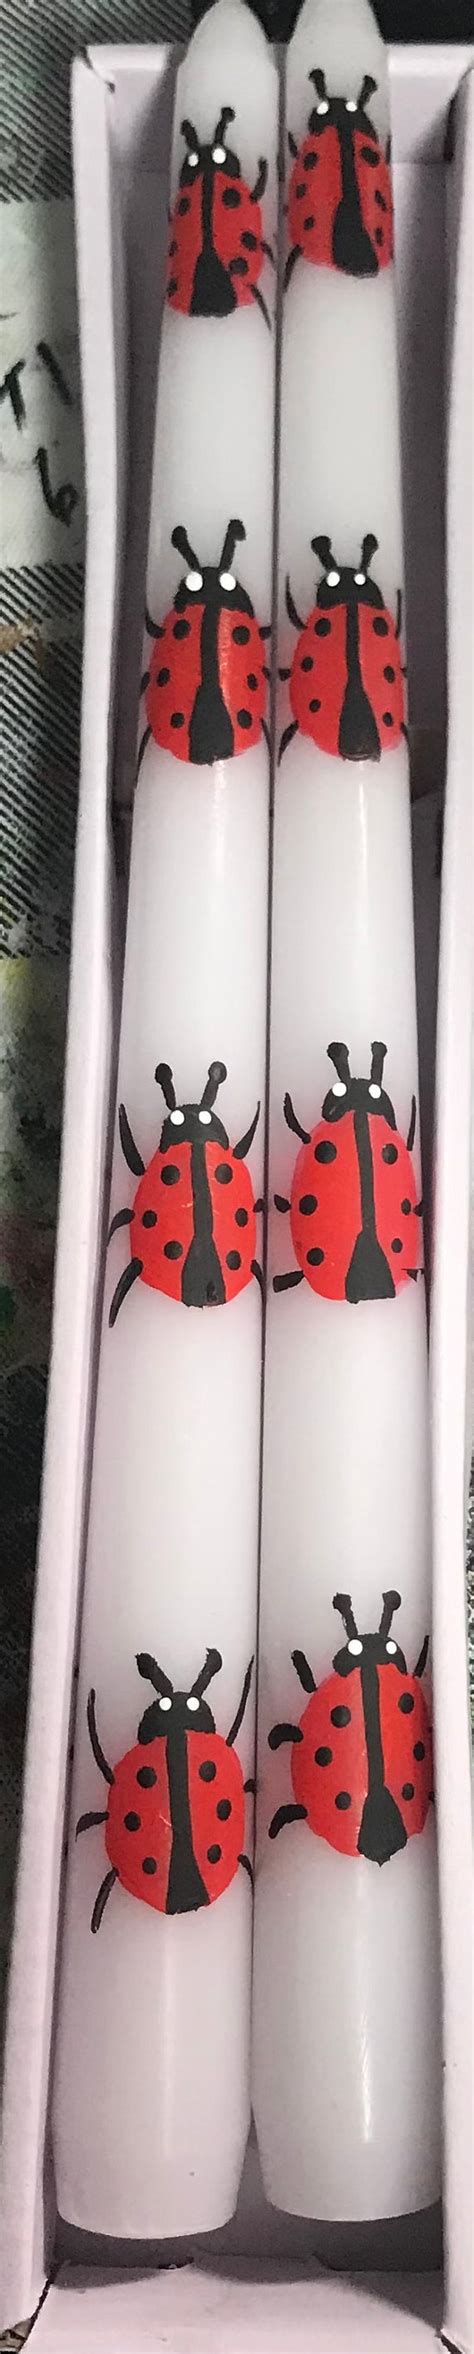 Hand Painted Ladybug Taper Candles Etsy